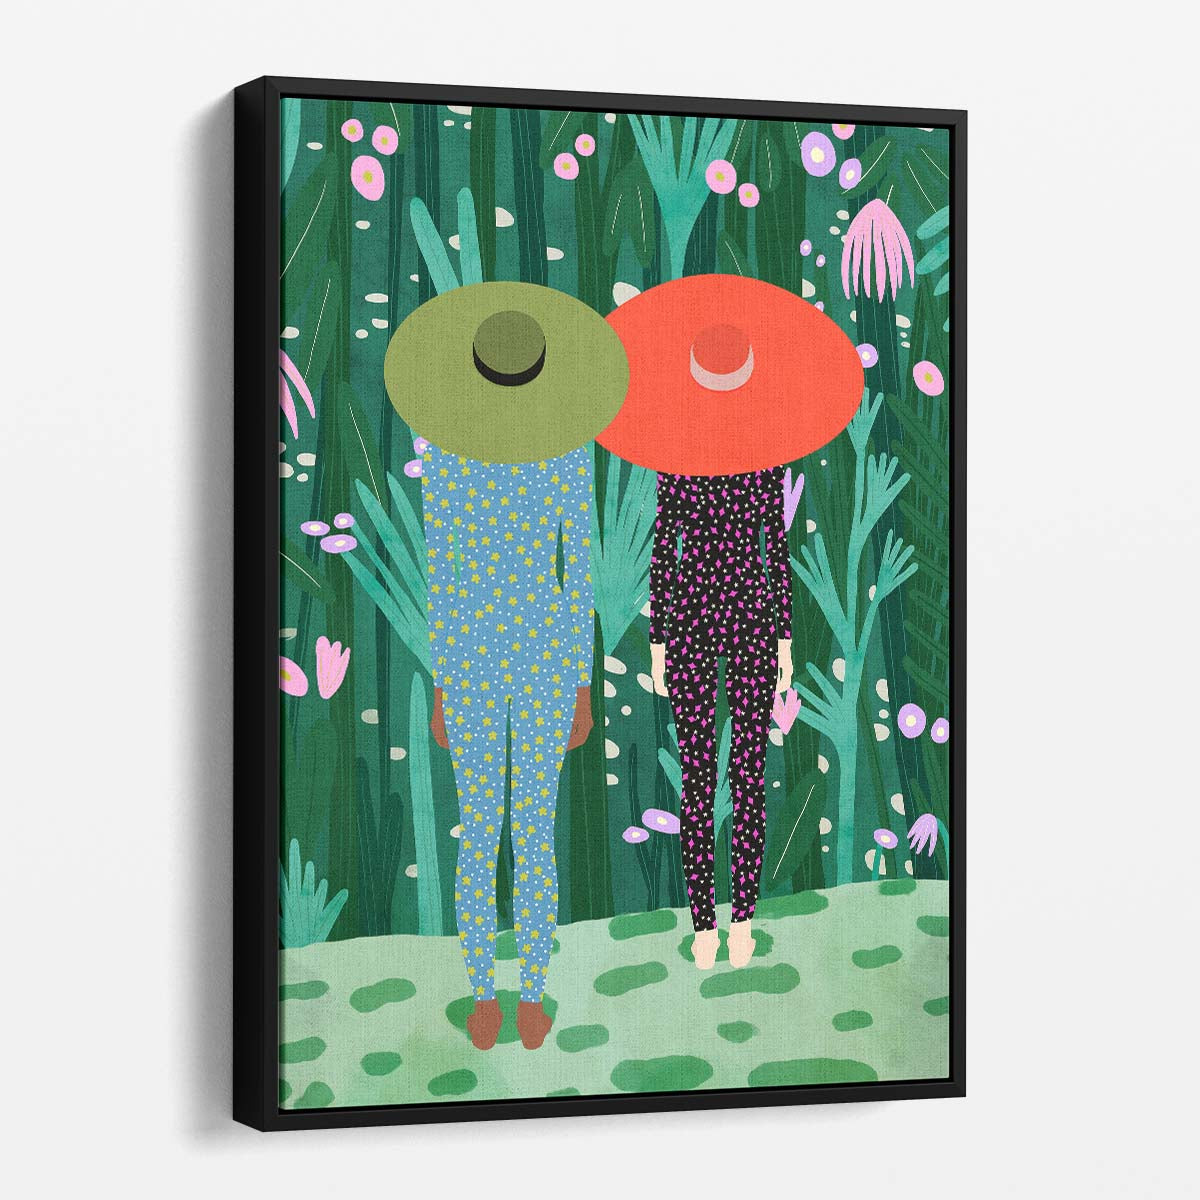 Tropical Jungle Illustration of Women with Hats, Botanical Artwork by Luxuriance Designs, made in USA